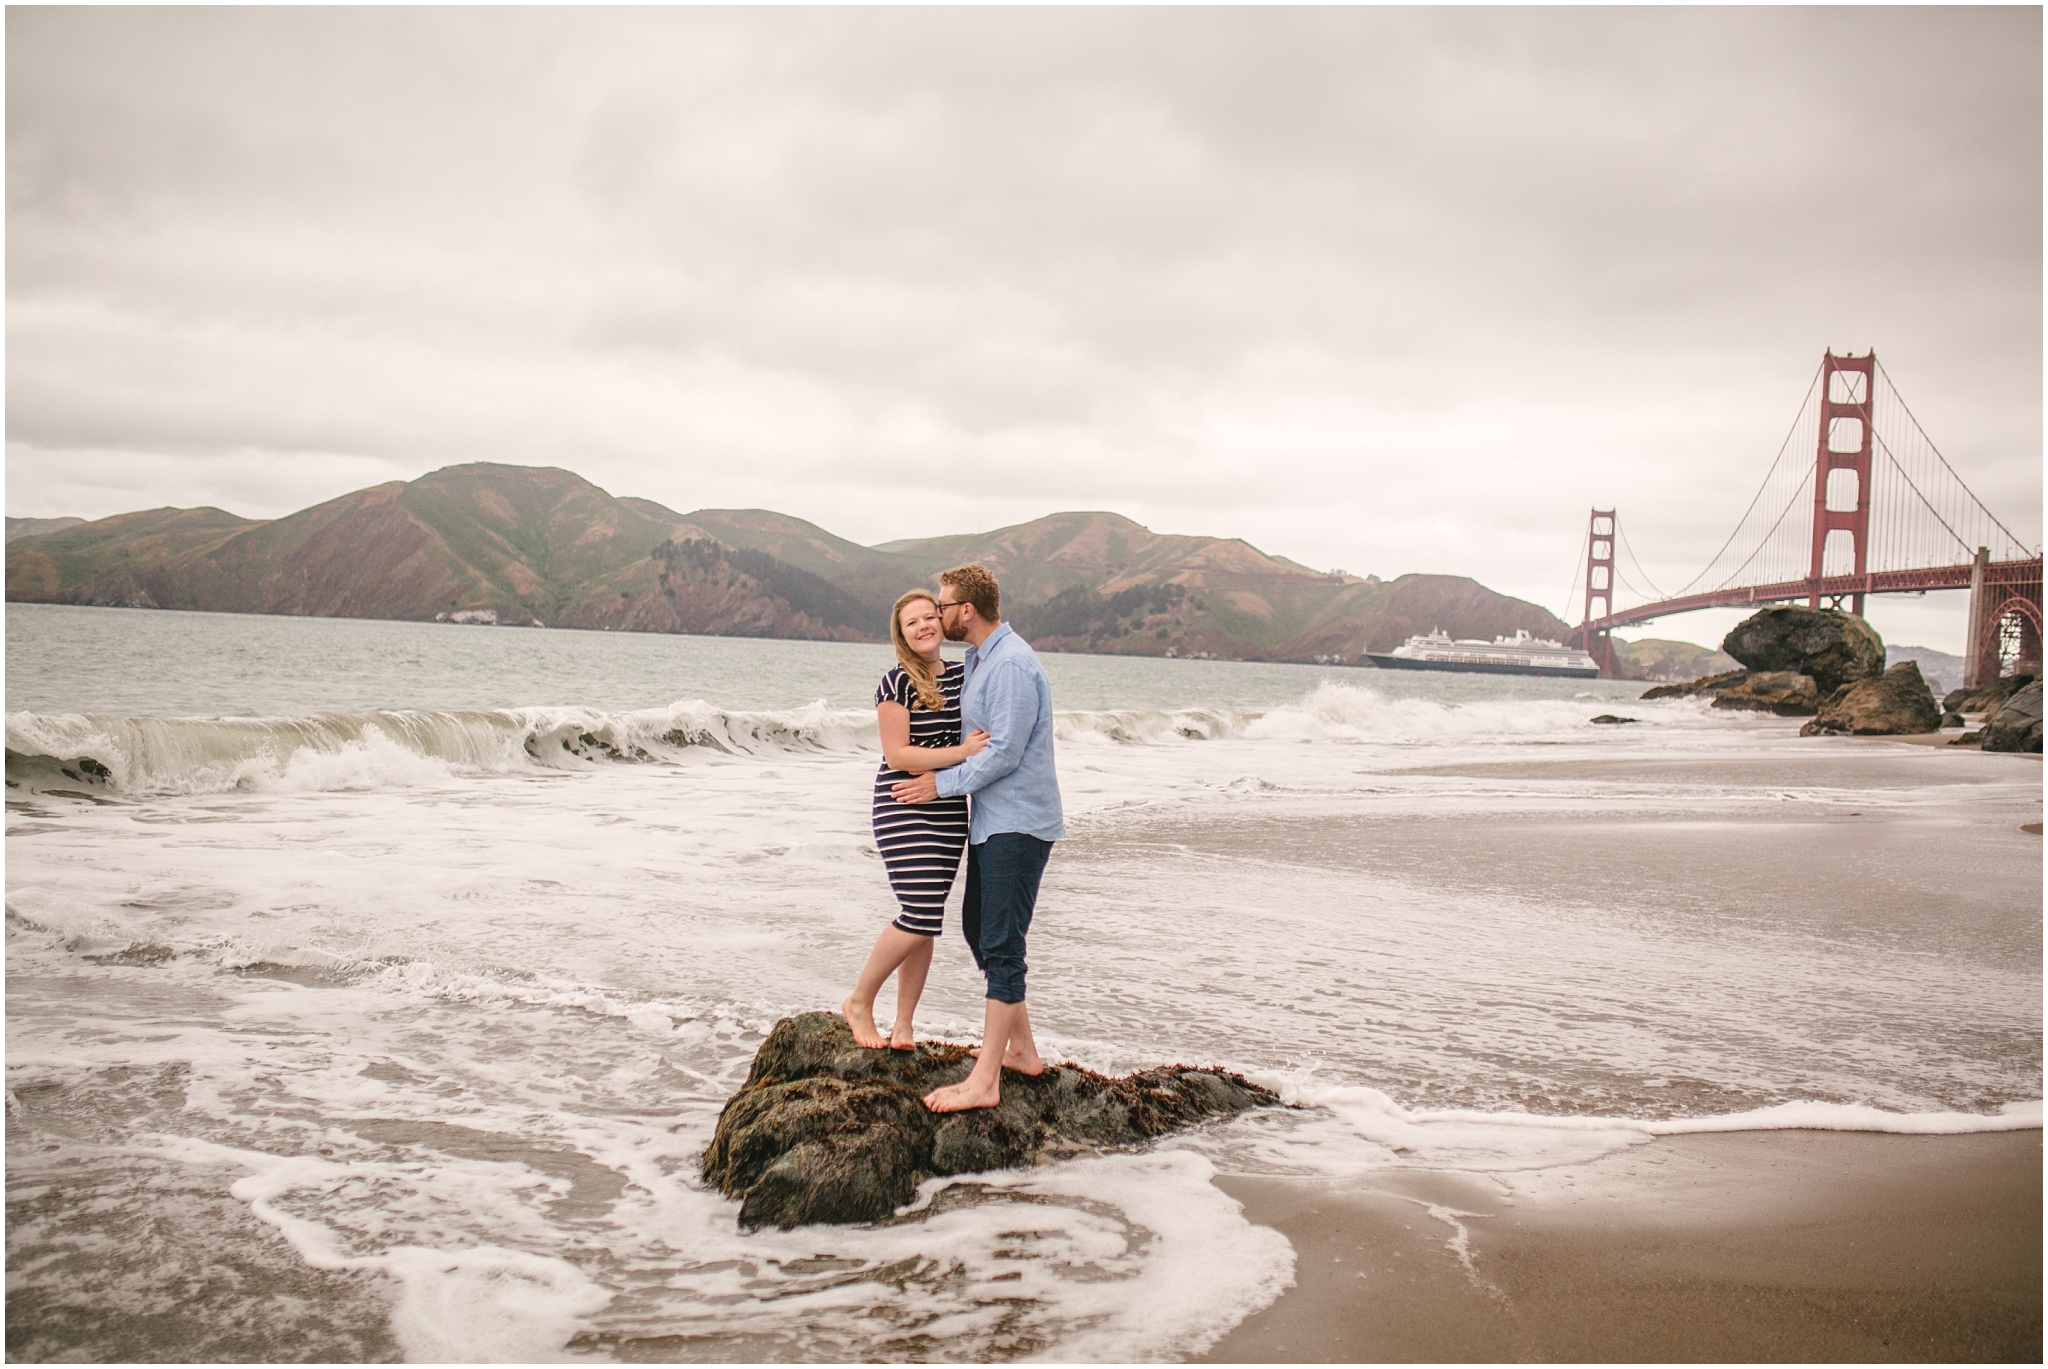 Marshall Beach San Francisco engagement pictures by Golden Gate Bridge